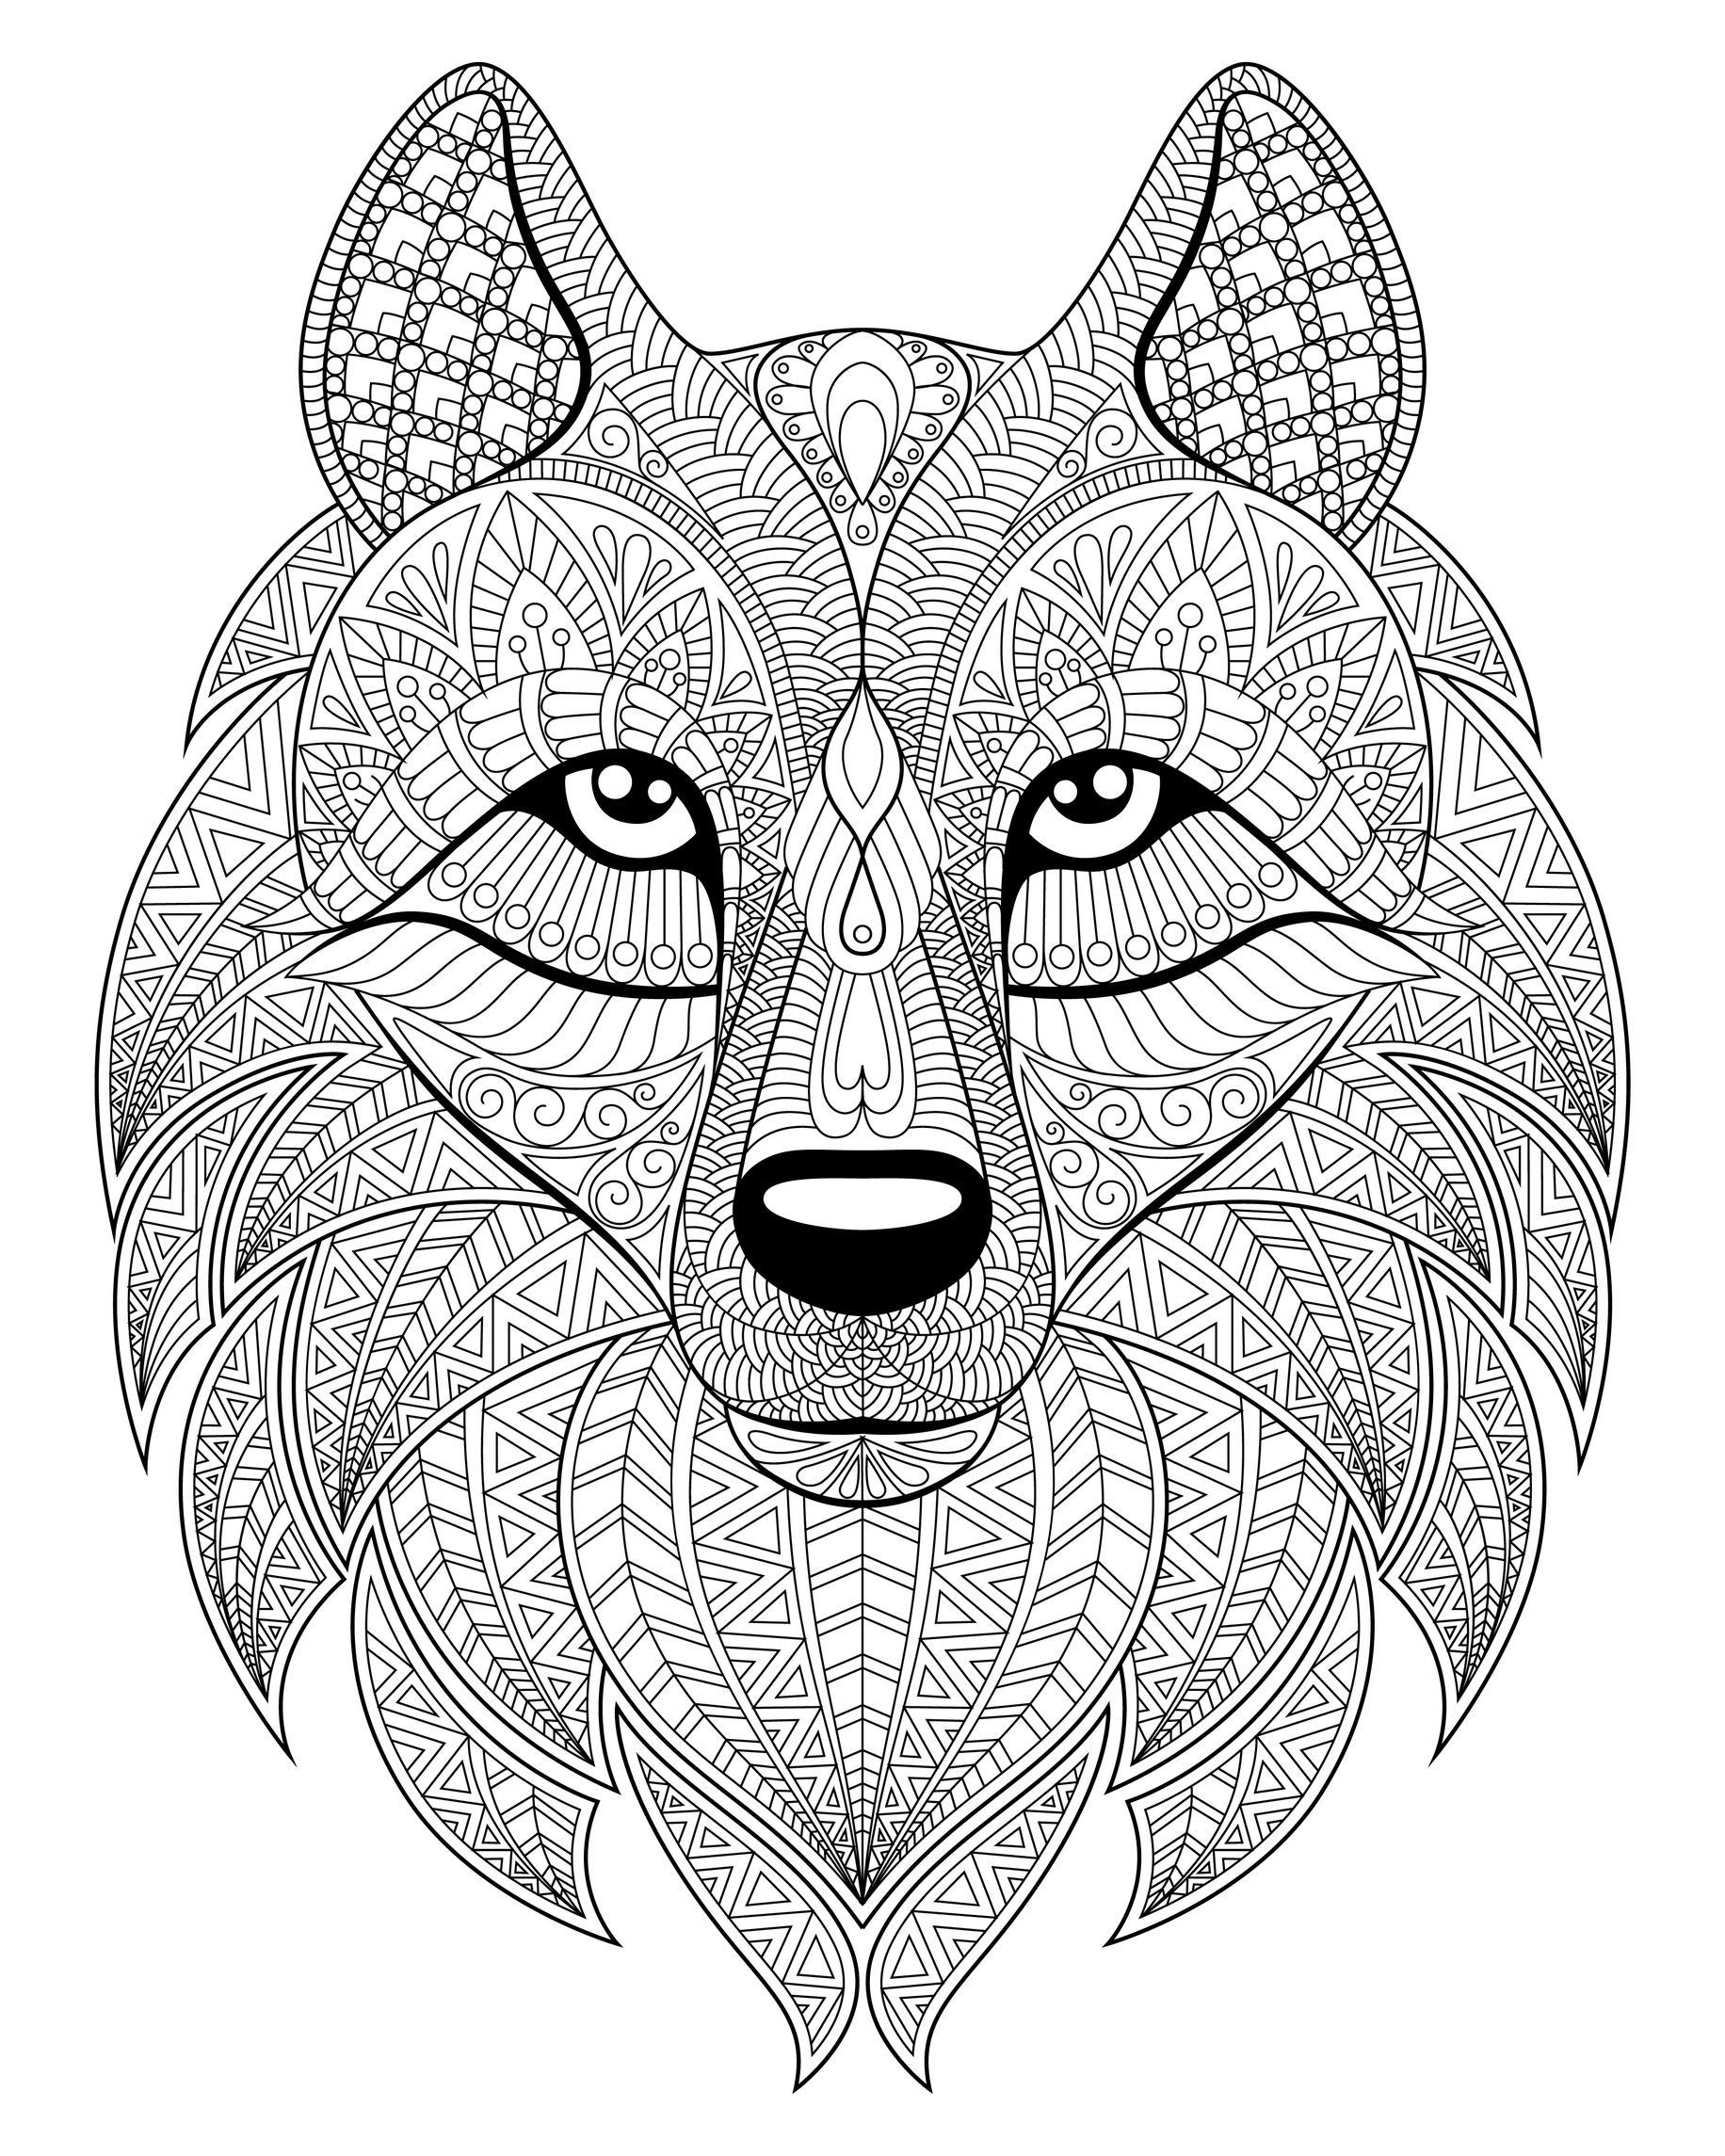 Wolf head with plex patterns from the gallery wolves pattern coloring pages animal coloring pages mandala coloring pages